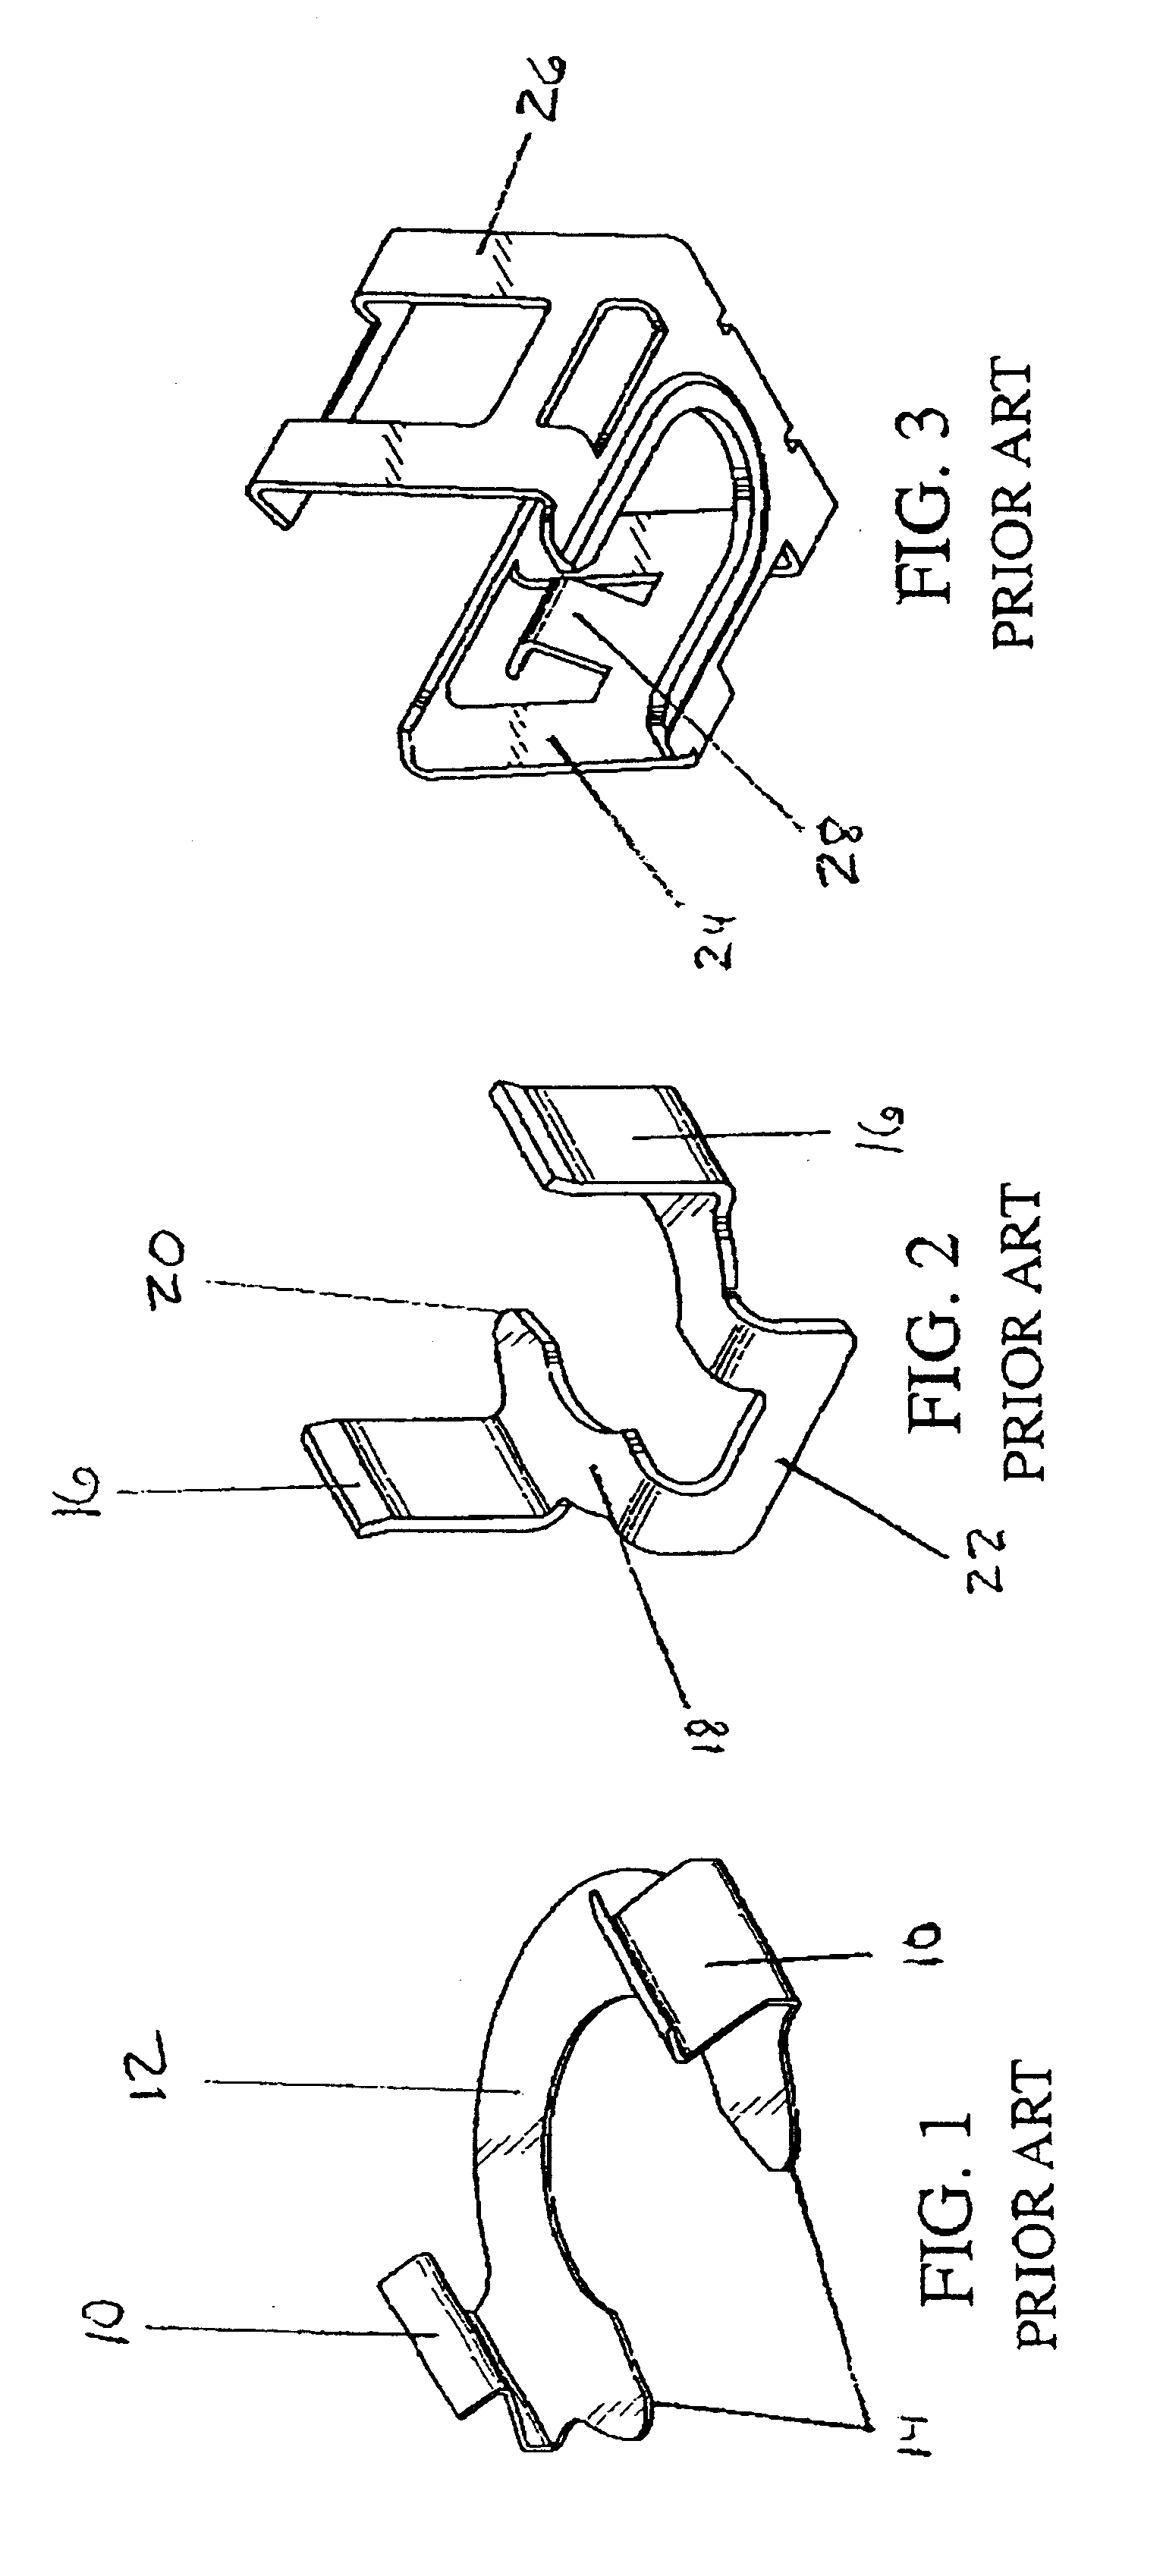 Method and apparatus for maintaining the alignment of a fuel injector